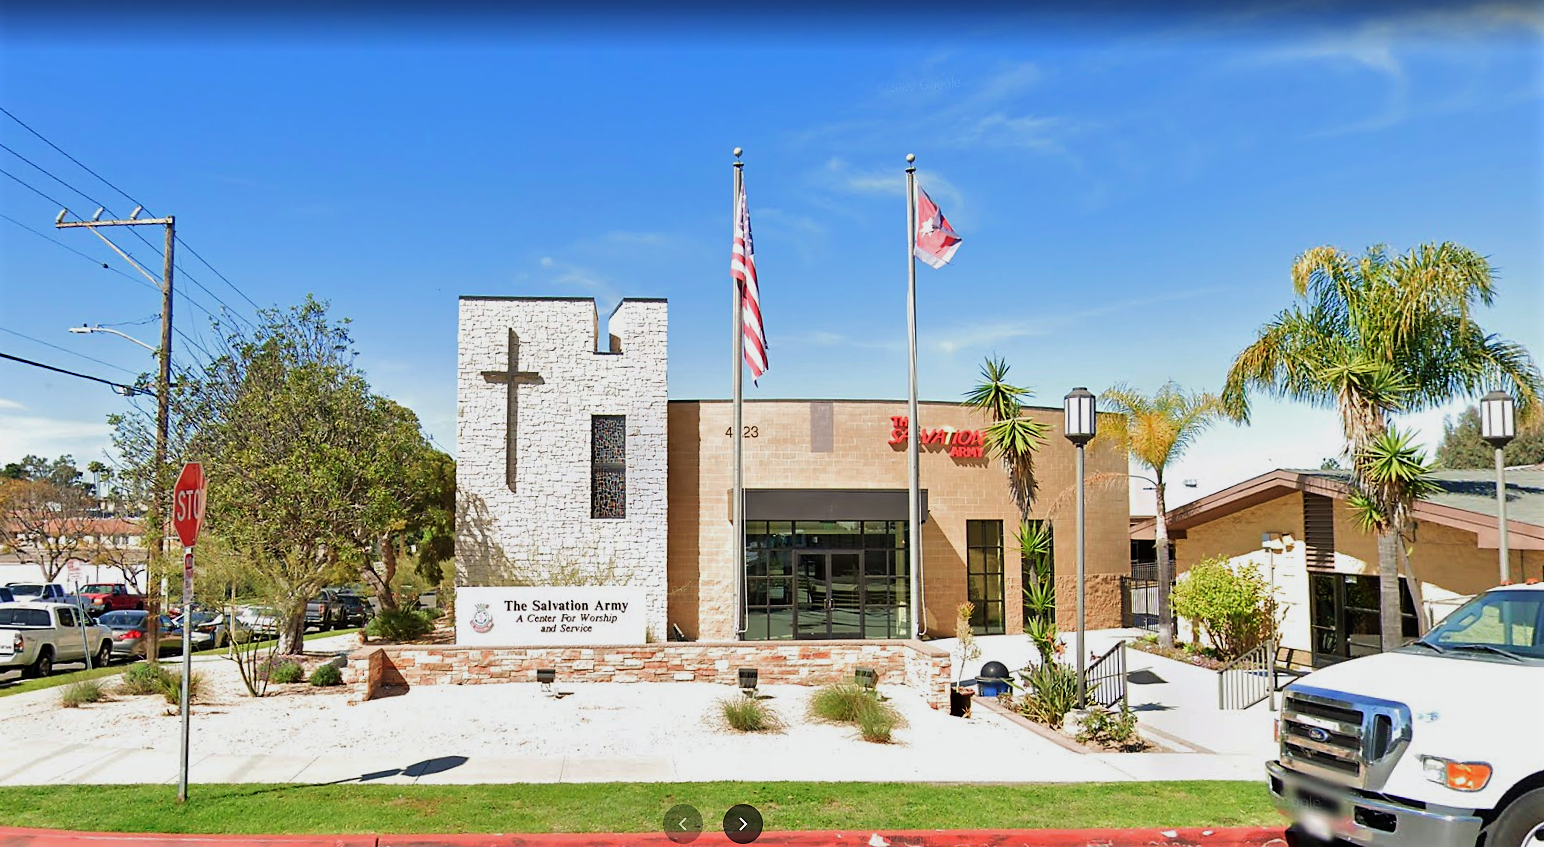 The Salvation Army Torrance